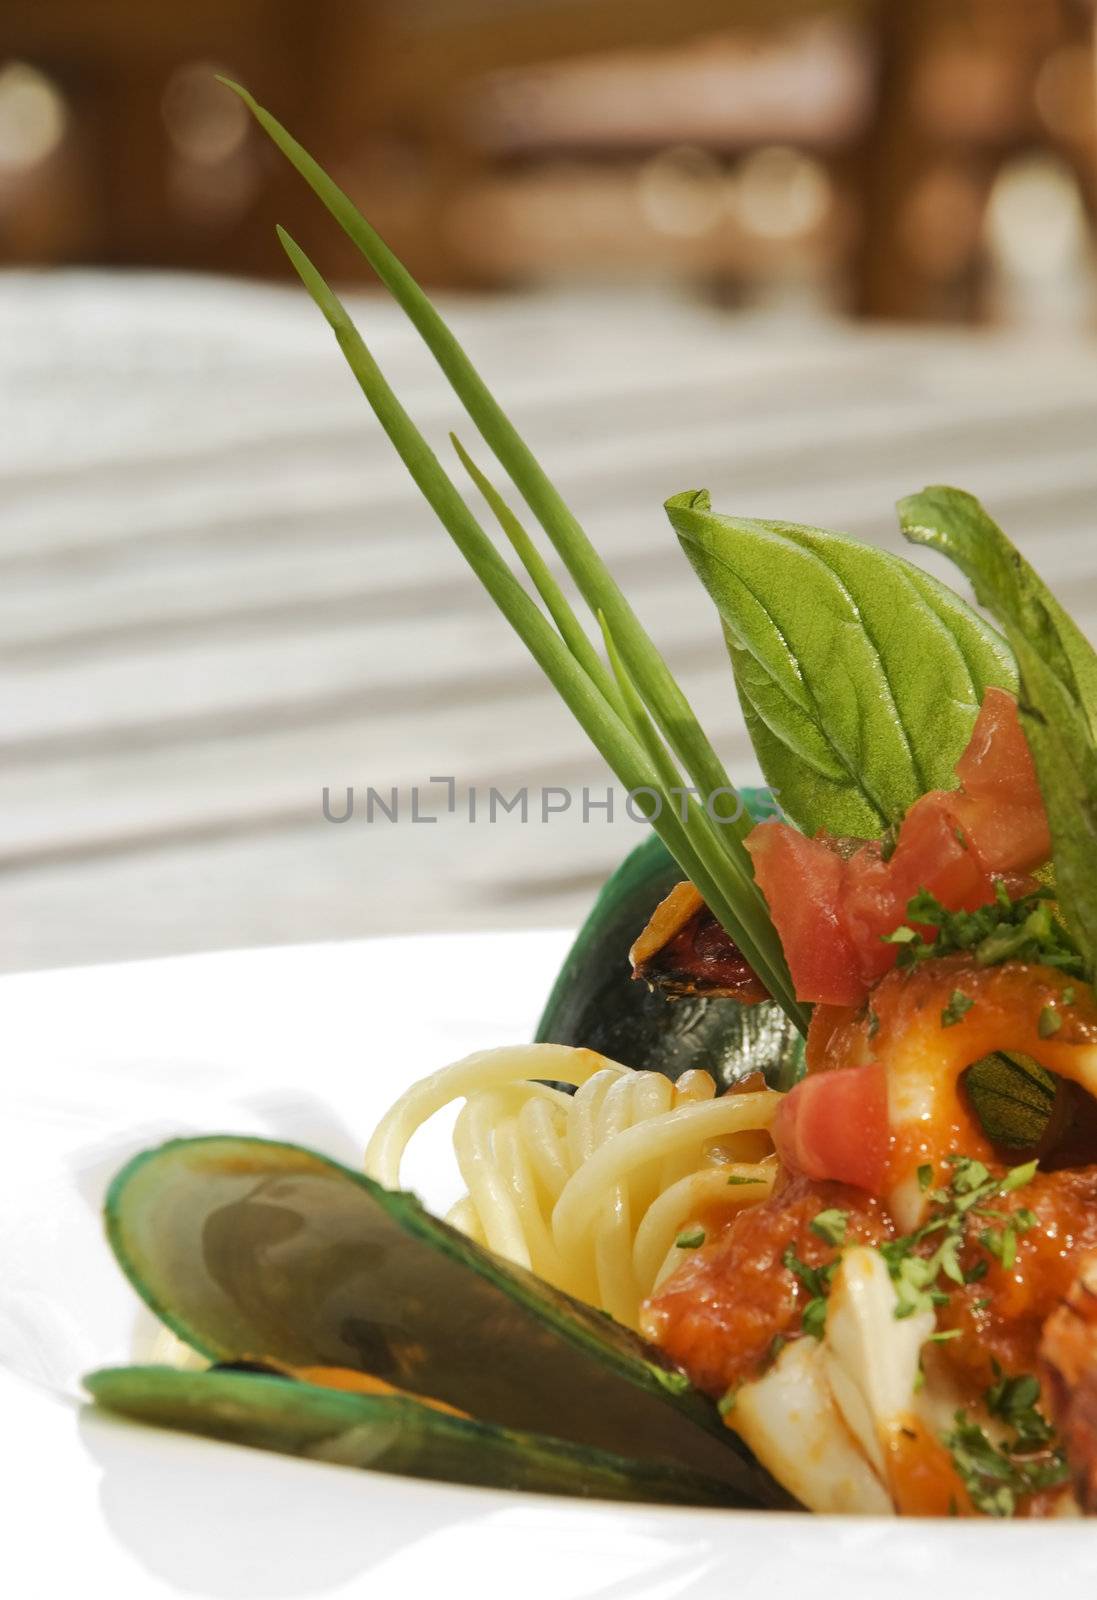 Oyster and sea food spaghetti with basil and served in a white ceramic plate